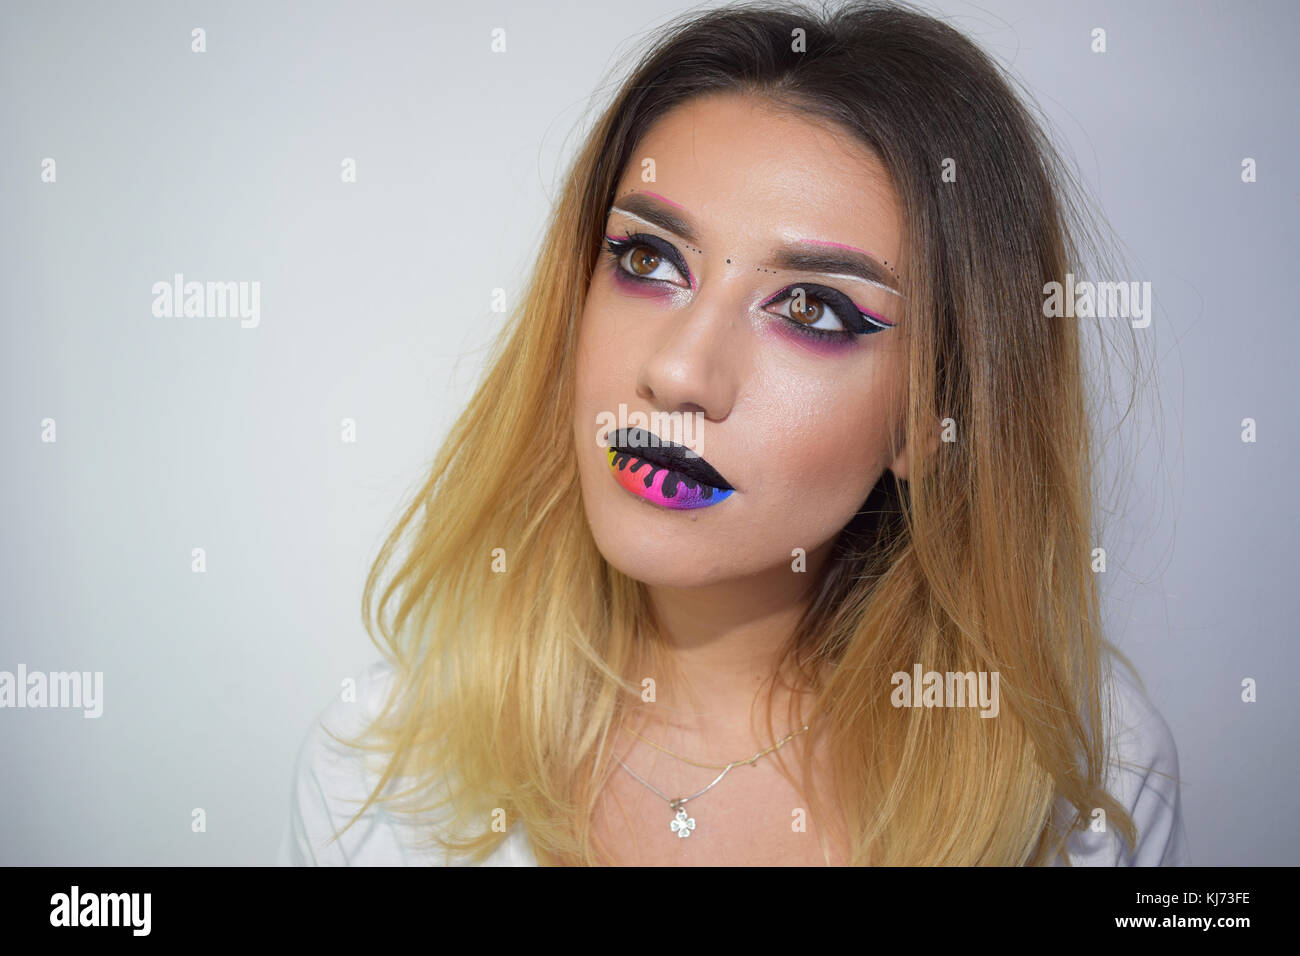 Pure art makeup including melting rainbow lips, a lollipop and a beautiful model Stock Photo